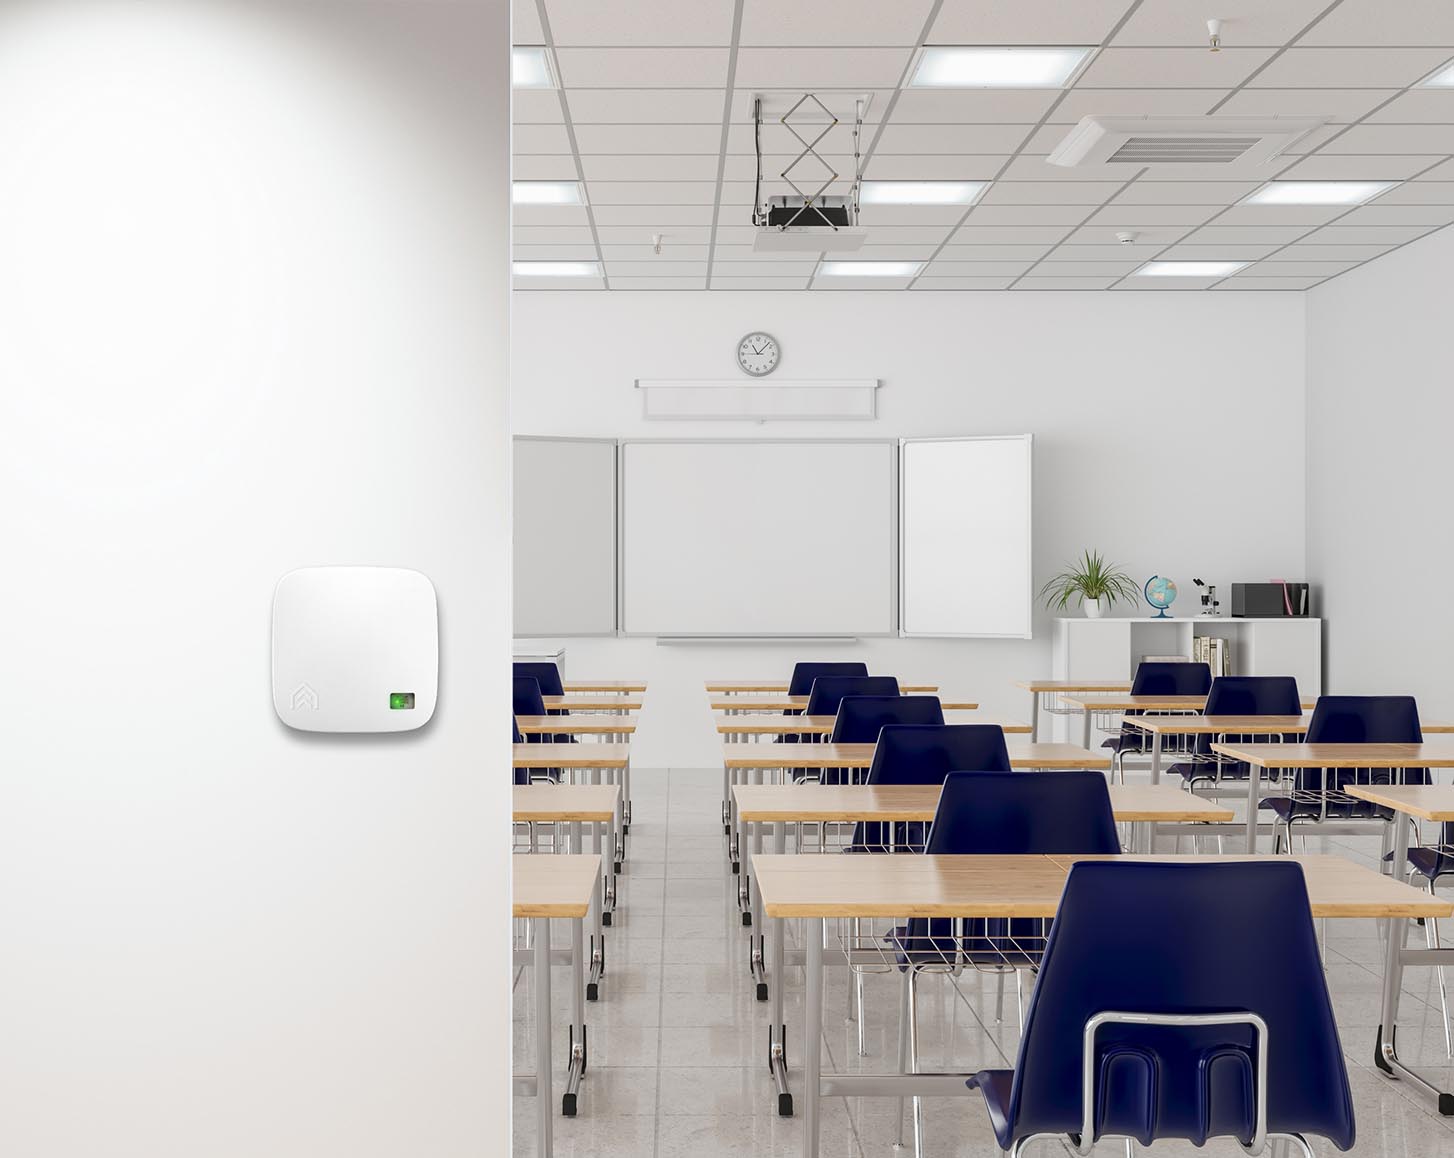 An AirSuite sensor on the wall of a classroom